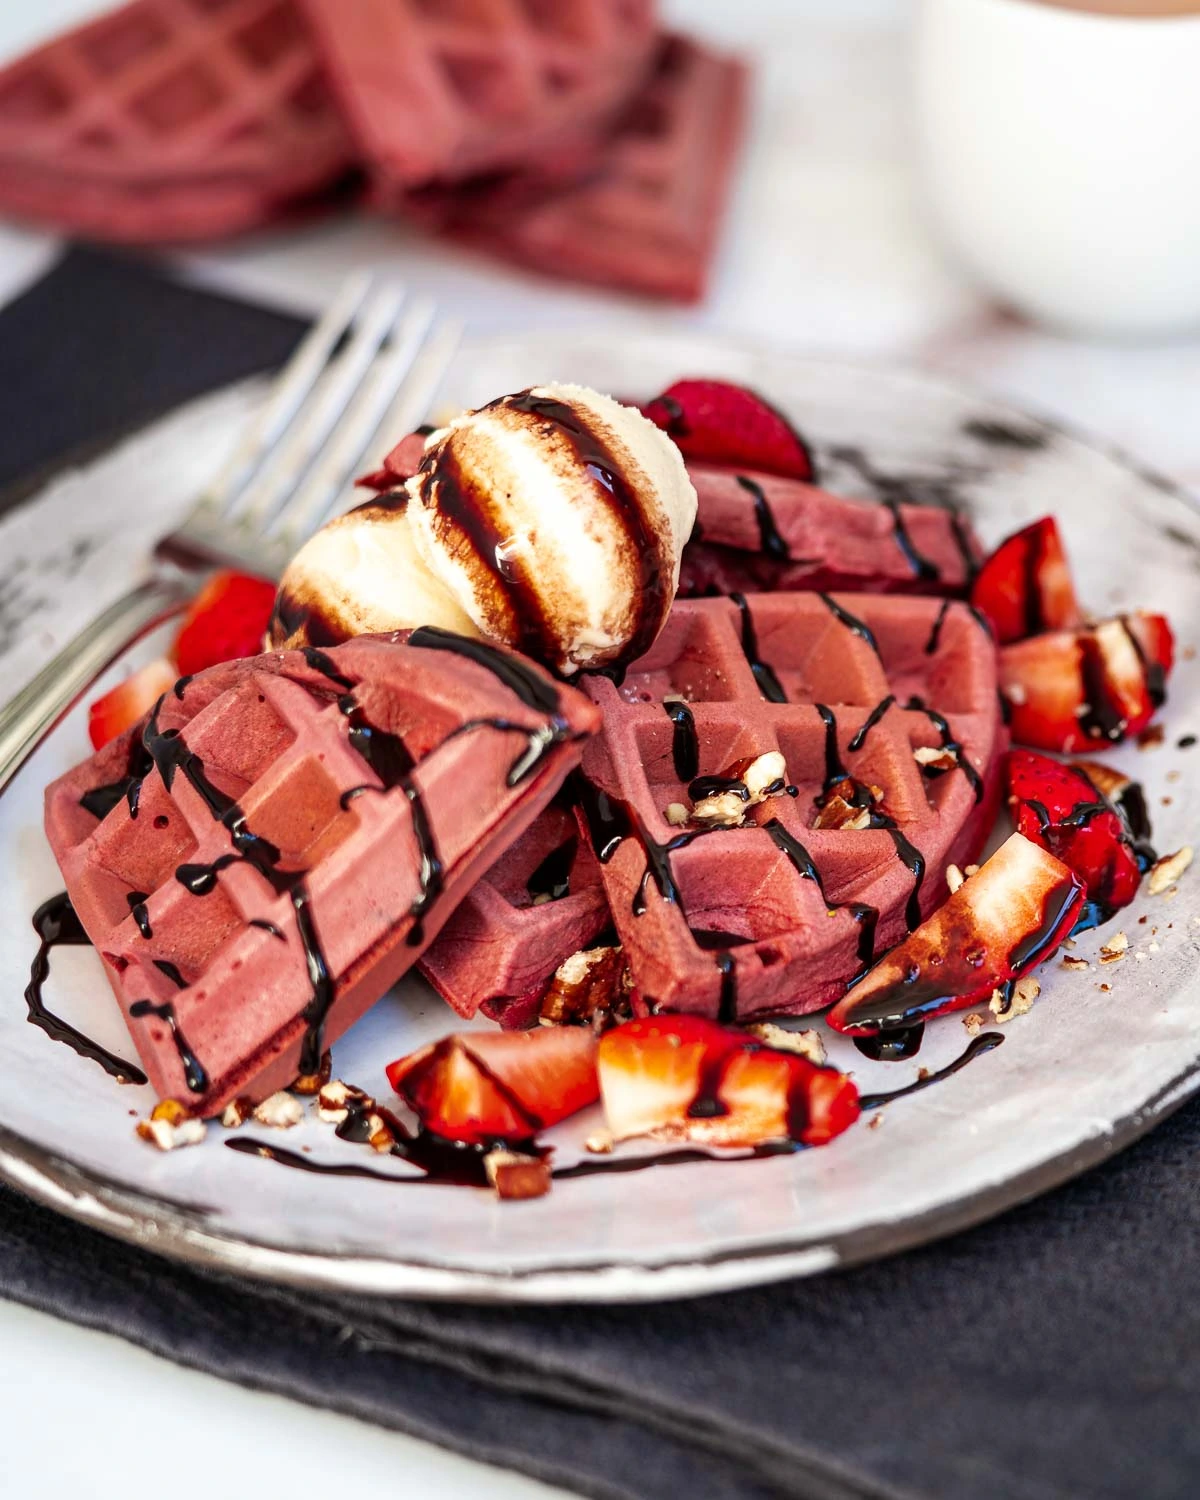 Red velvet waffles, served with ice cream, chocolate and strawberries